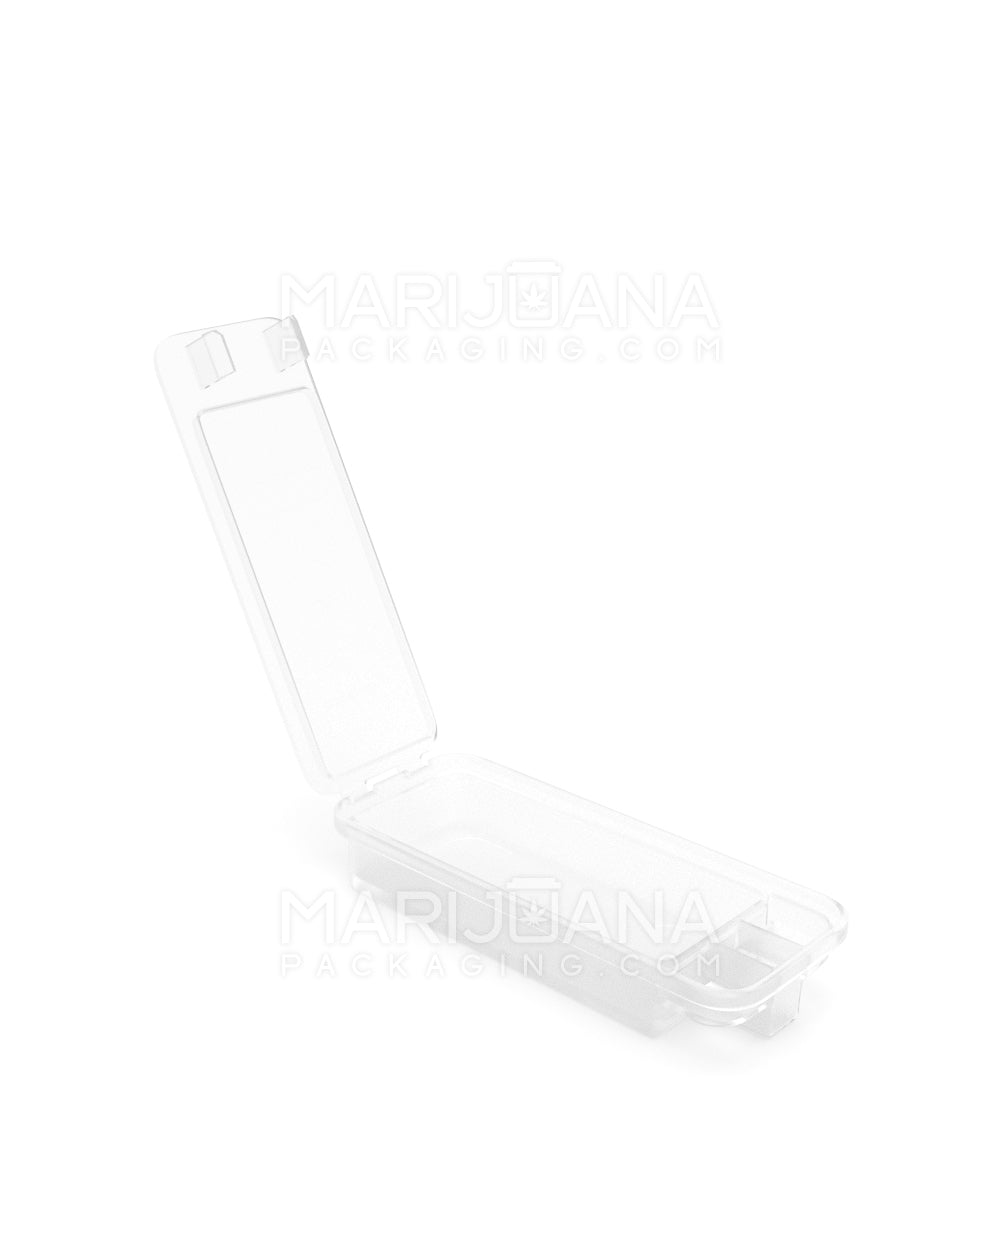 Child Resistant | Snap Box Pre-Roll Joint Case | Small - Clear Plastic - 240 Count - 1